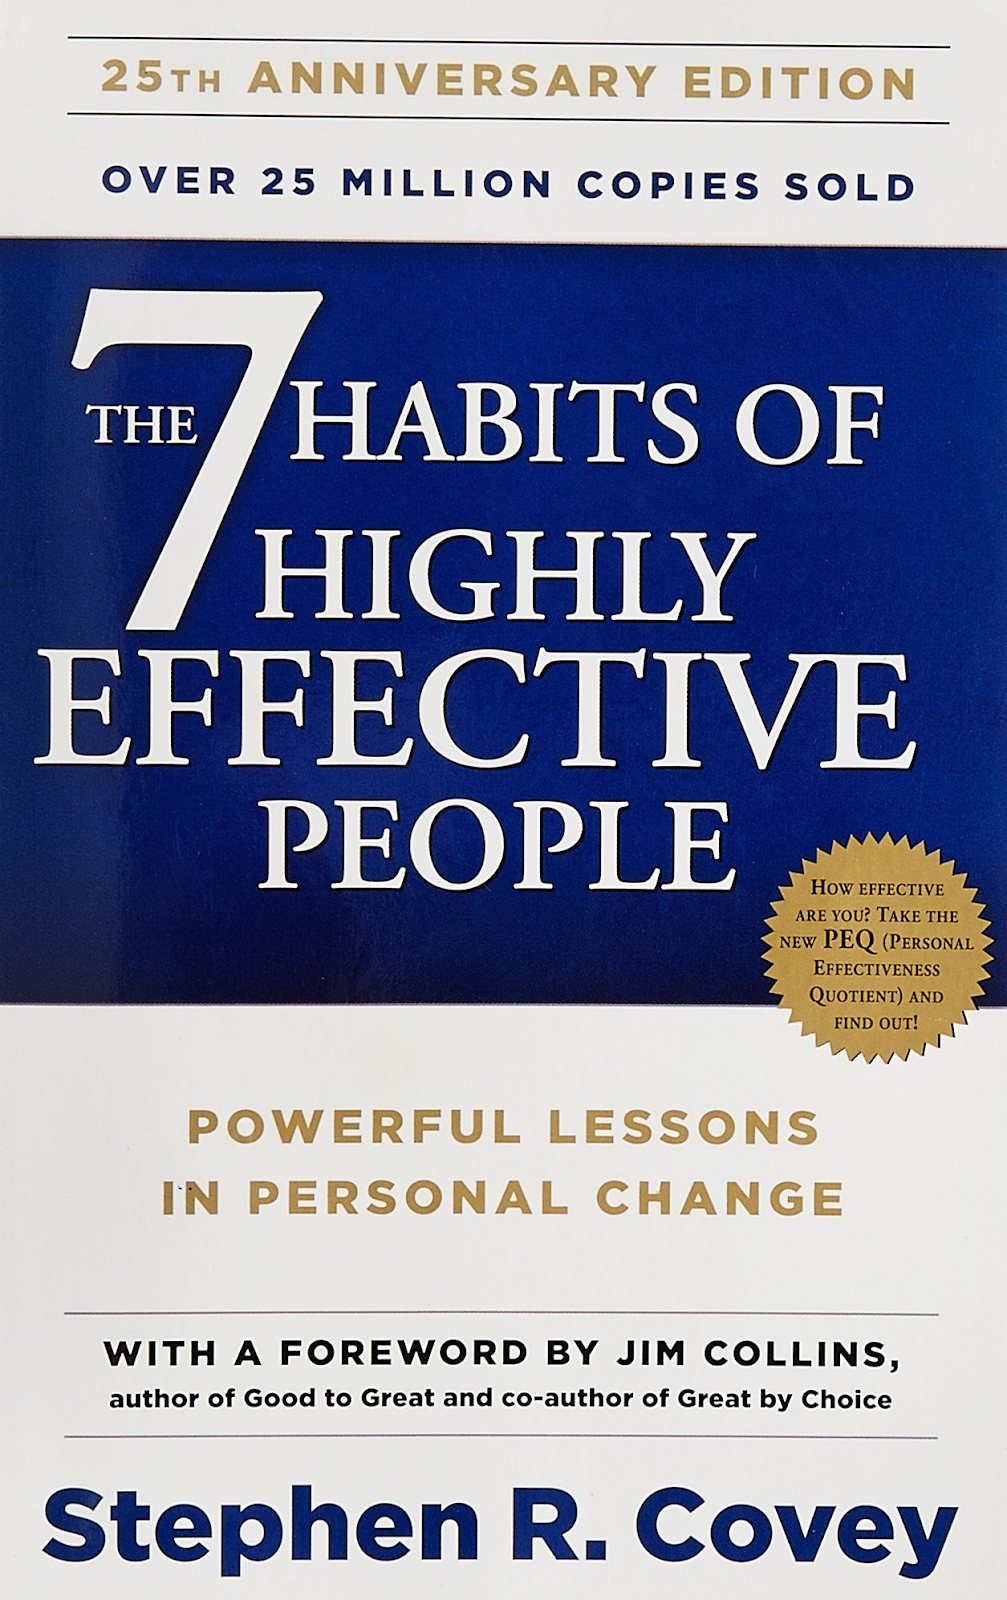 Buch „The 7 Habits of Highly Effective People“.